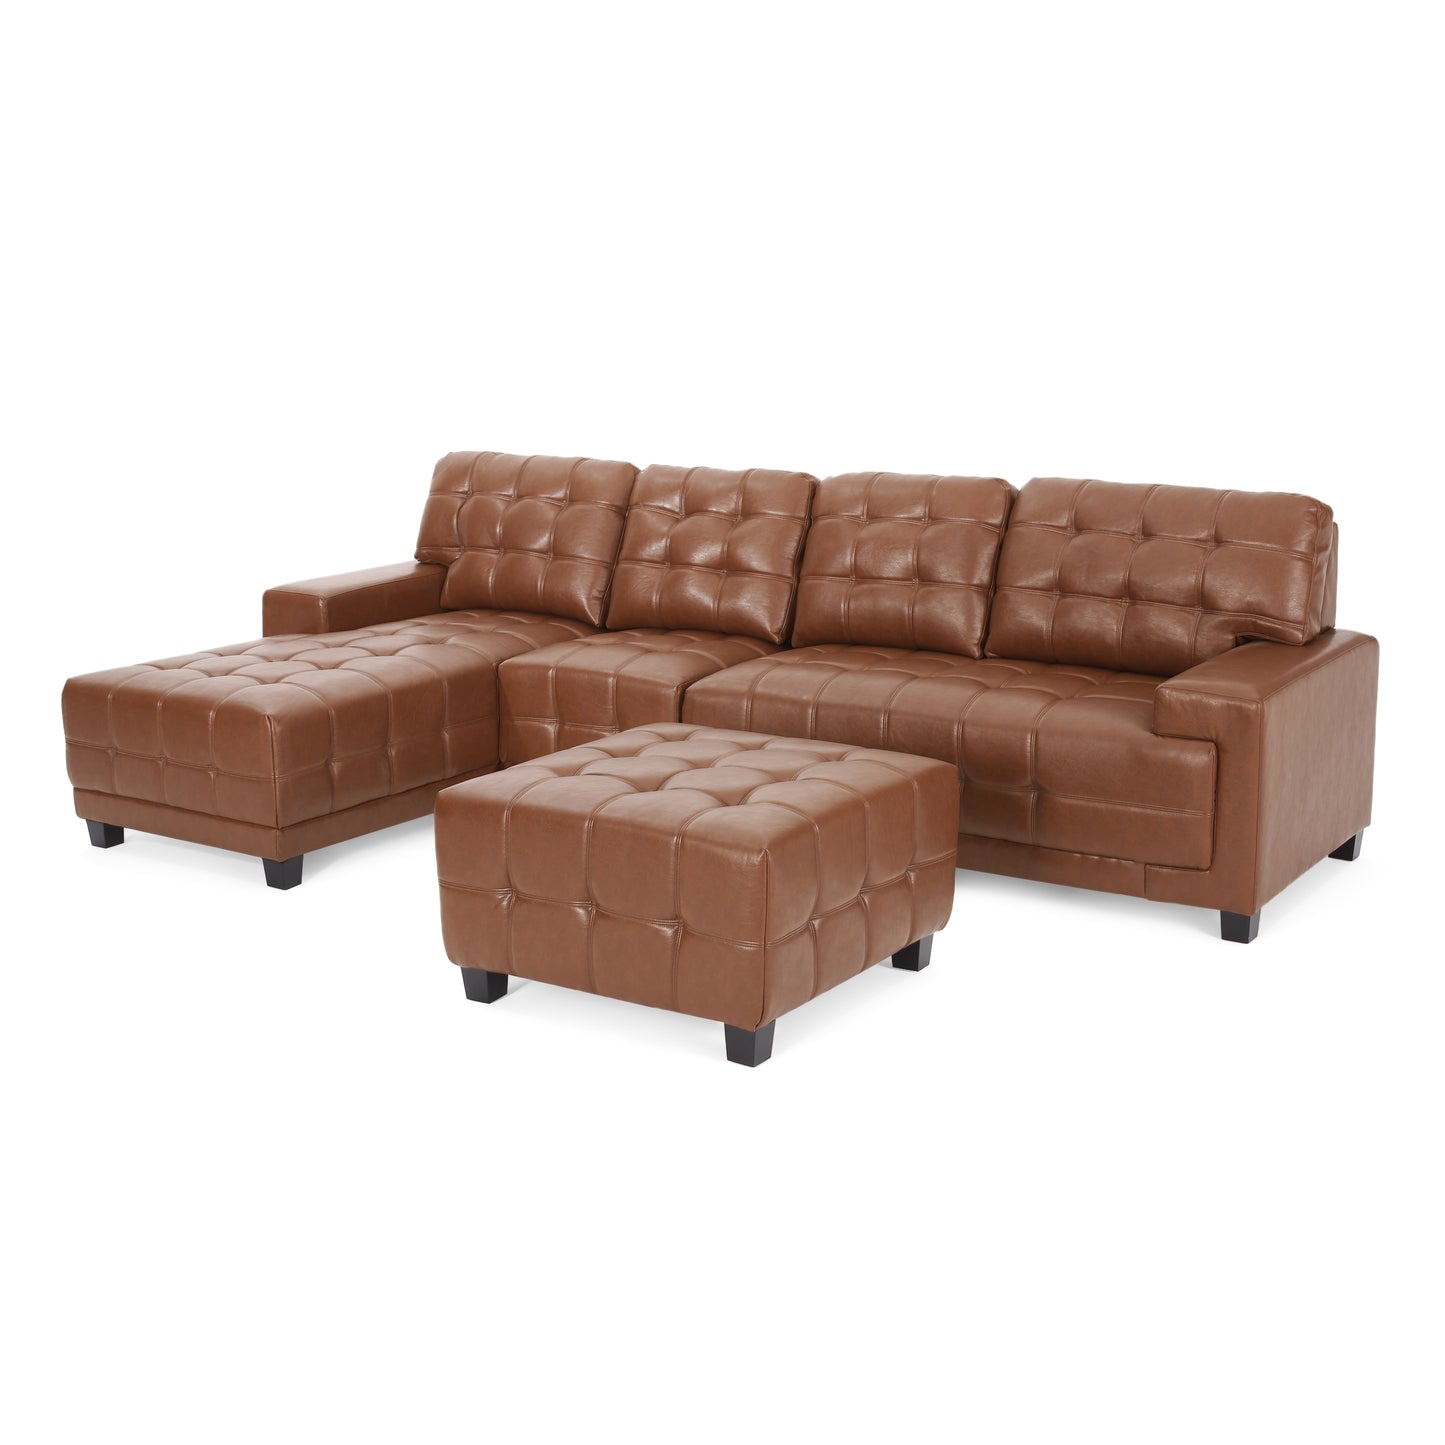 Littell Contemporary Faux Leather Tufted 4 Seater Sofa and Chaise Lounge Sectional Set with Ottoman